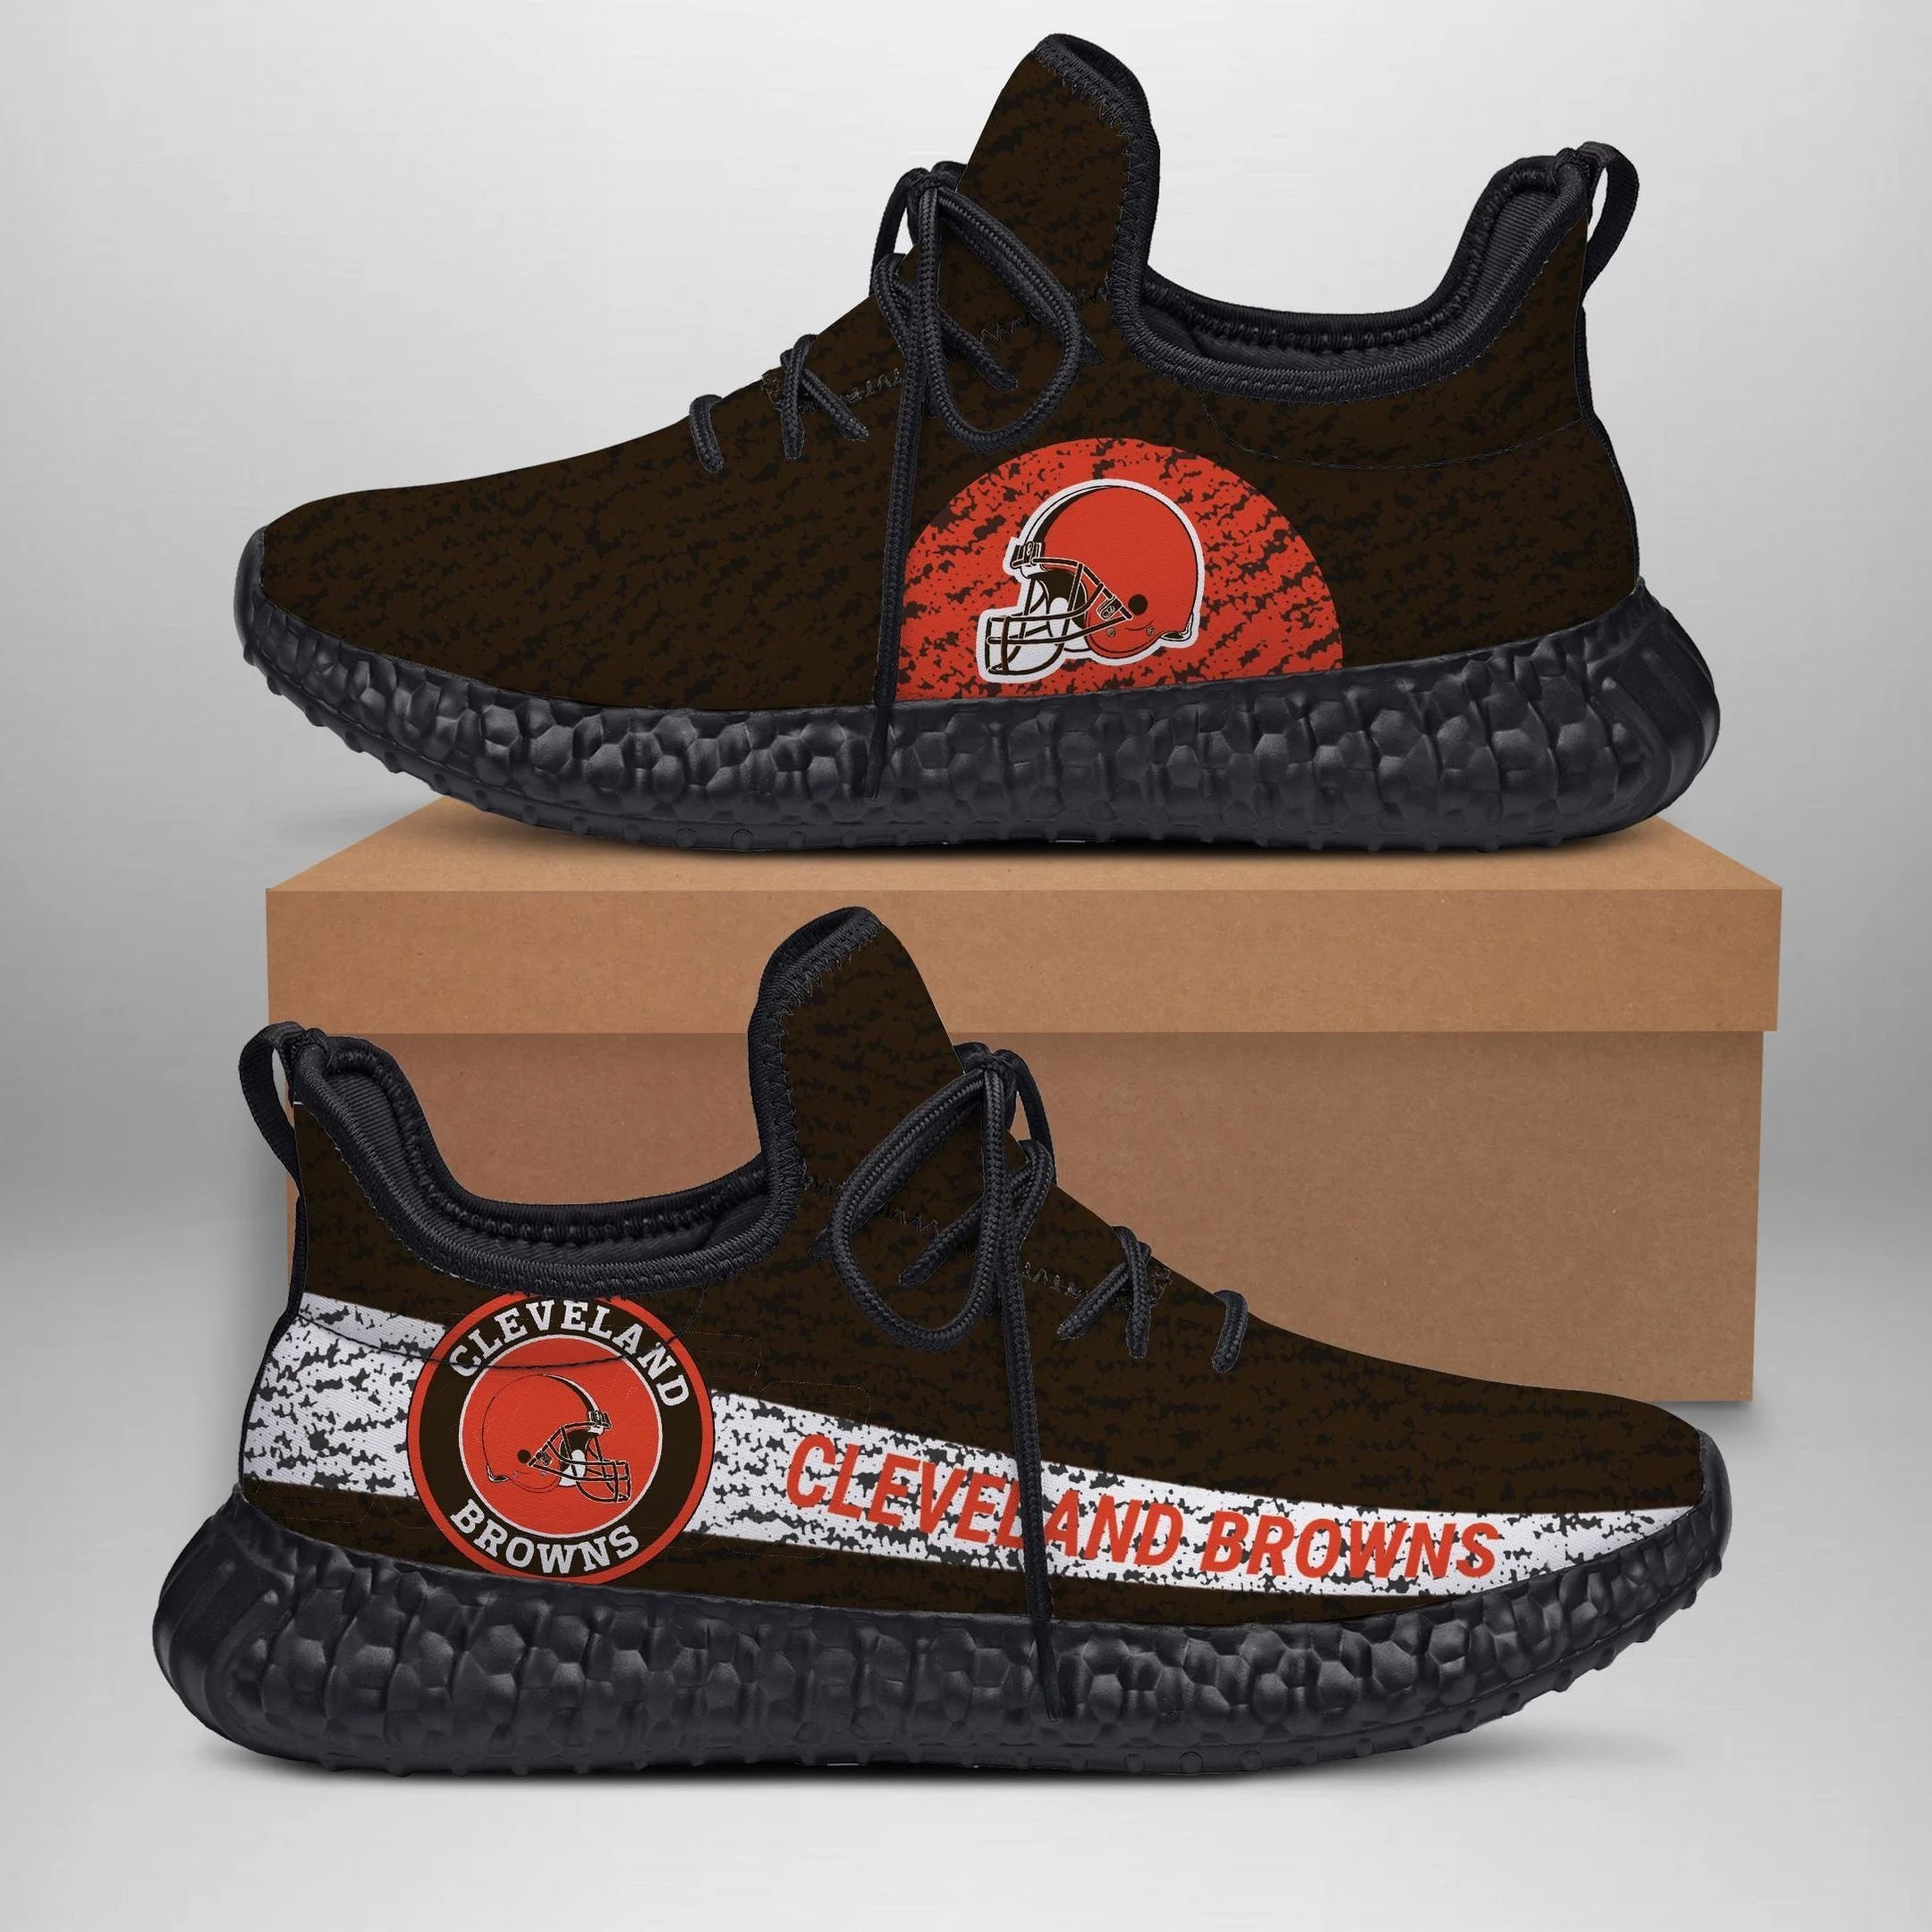 Buy Cleveland Browns Yeezy Shoes Yeezy Boost 350 V2 Top Trending Custom Shoes Gift